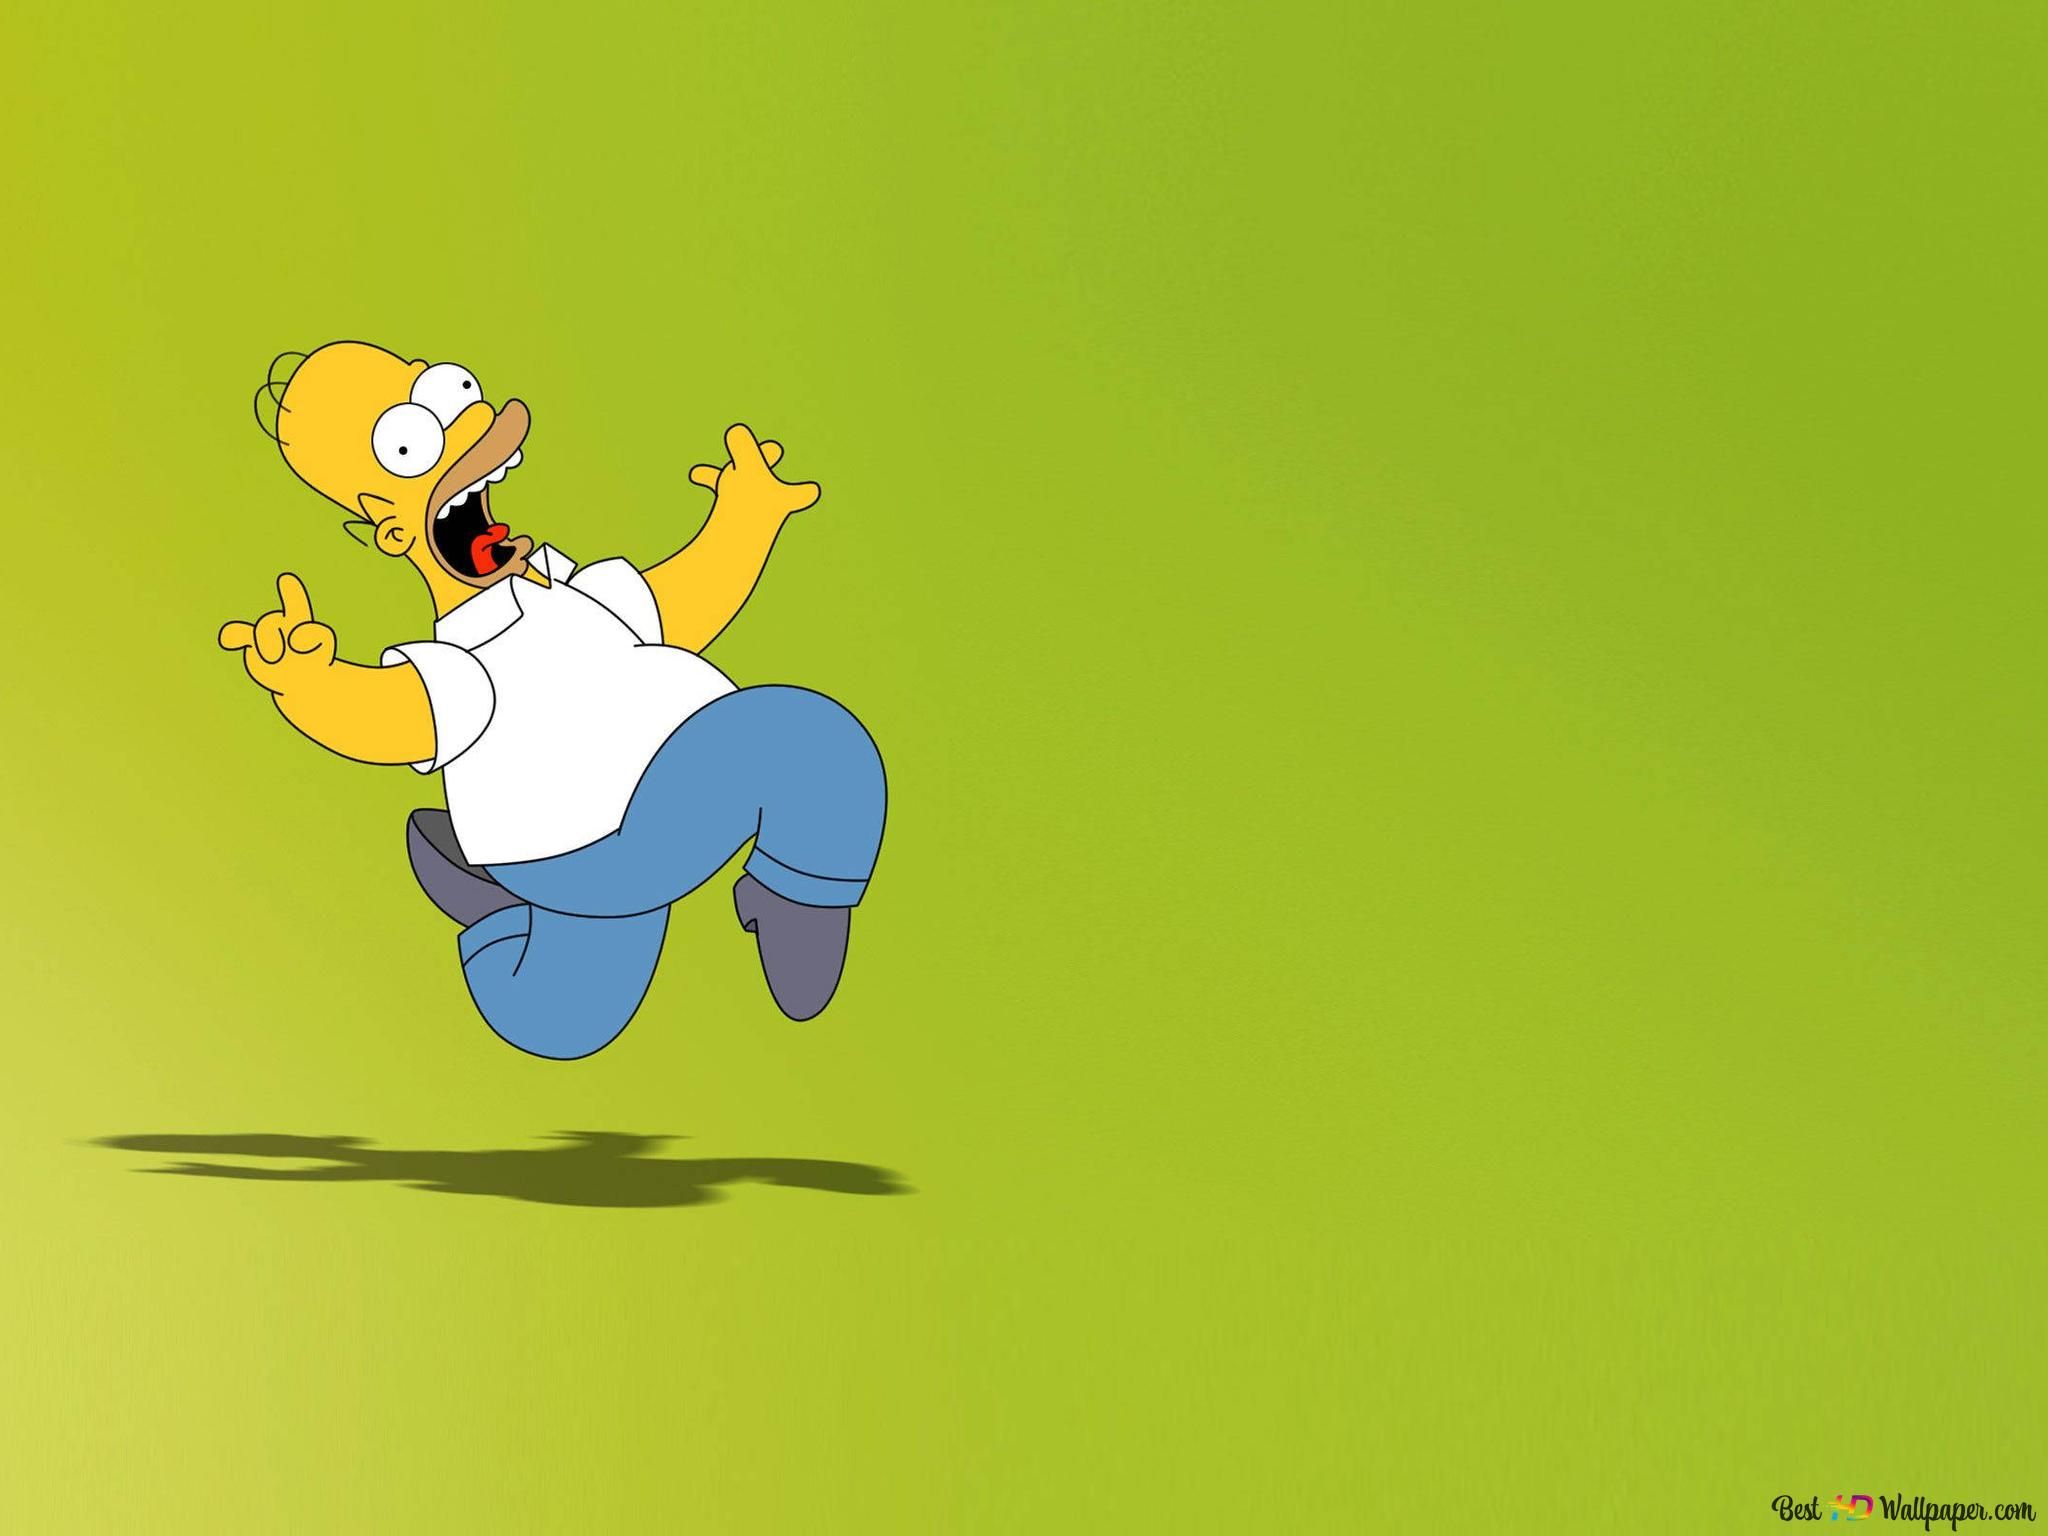 Homer Simpson jumping in the air - The Simpsons